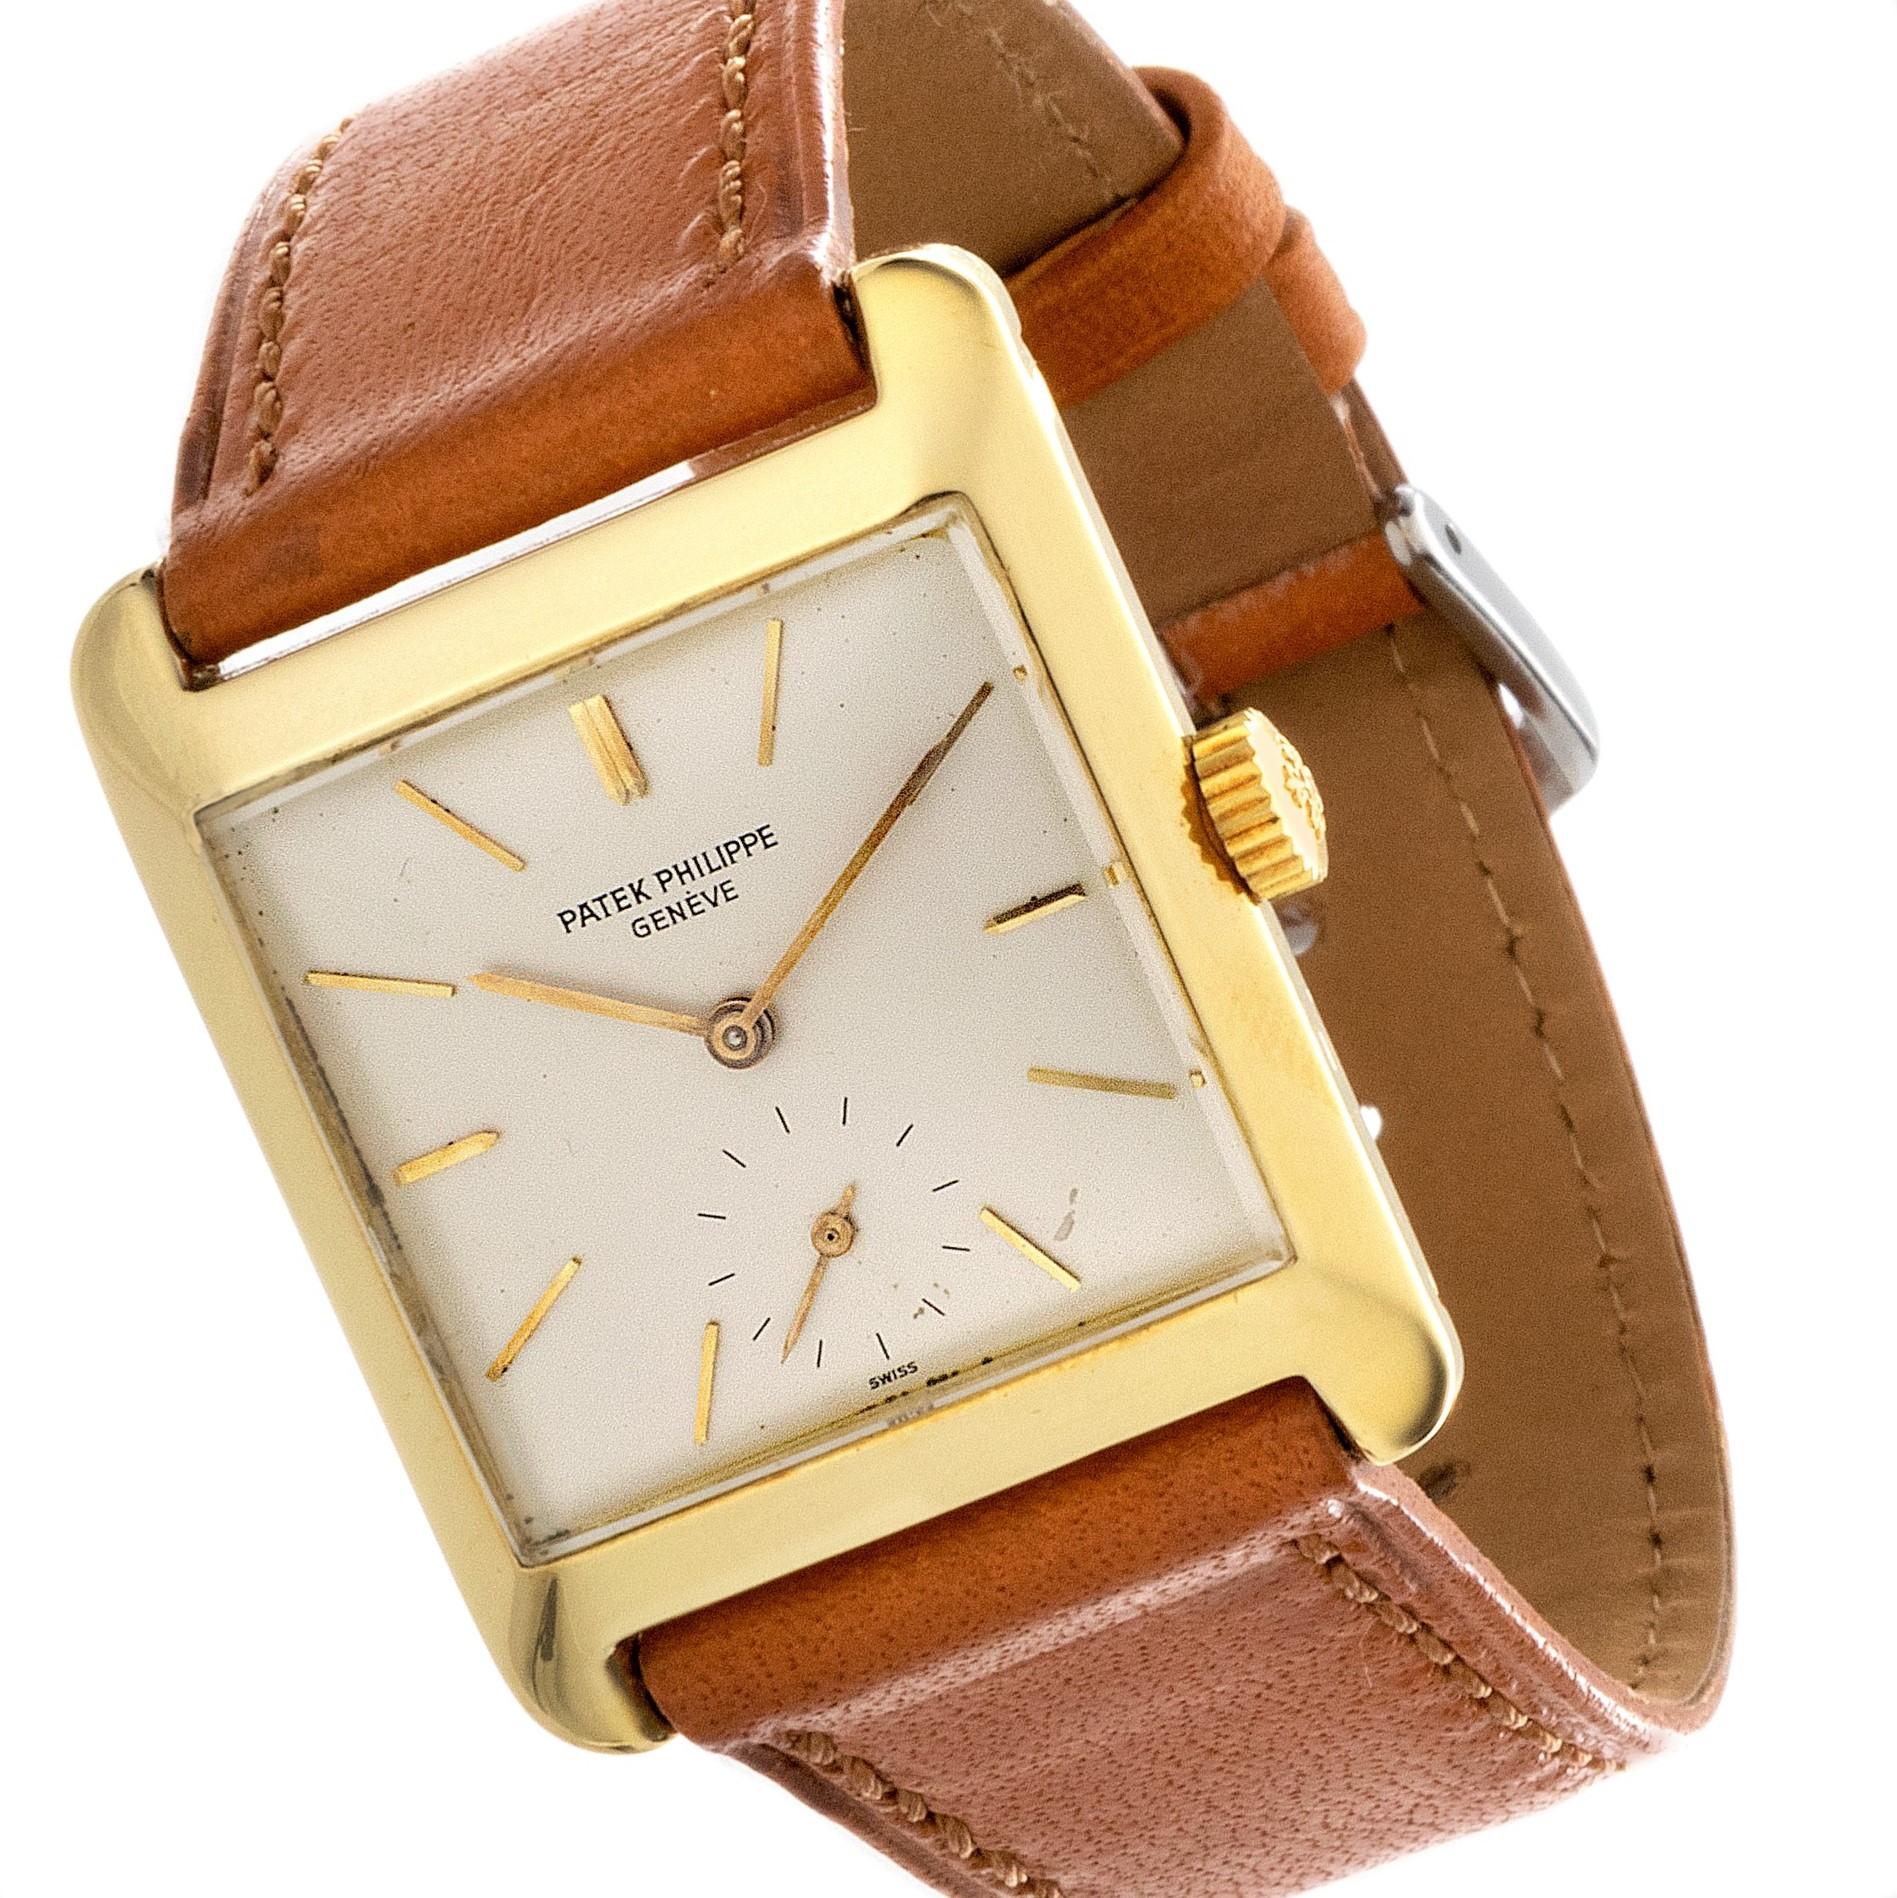 Patek Philippe 2488J Manual Wind Watch In Excellent Condition For Sale In Santa Monica, CA